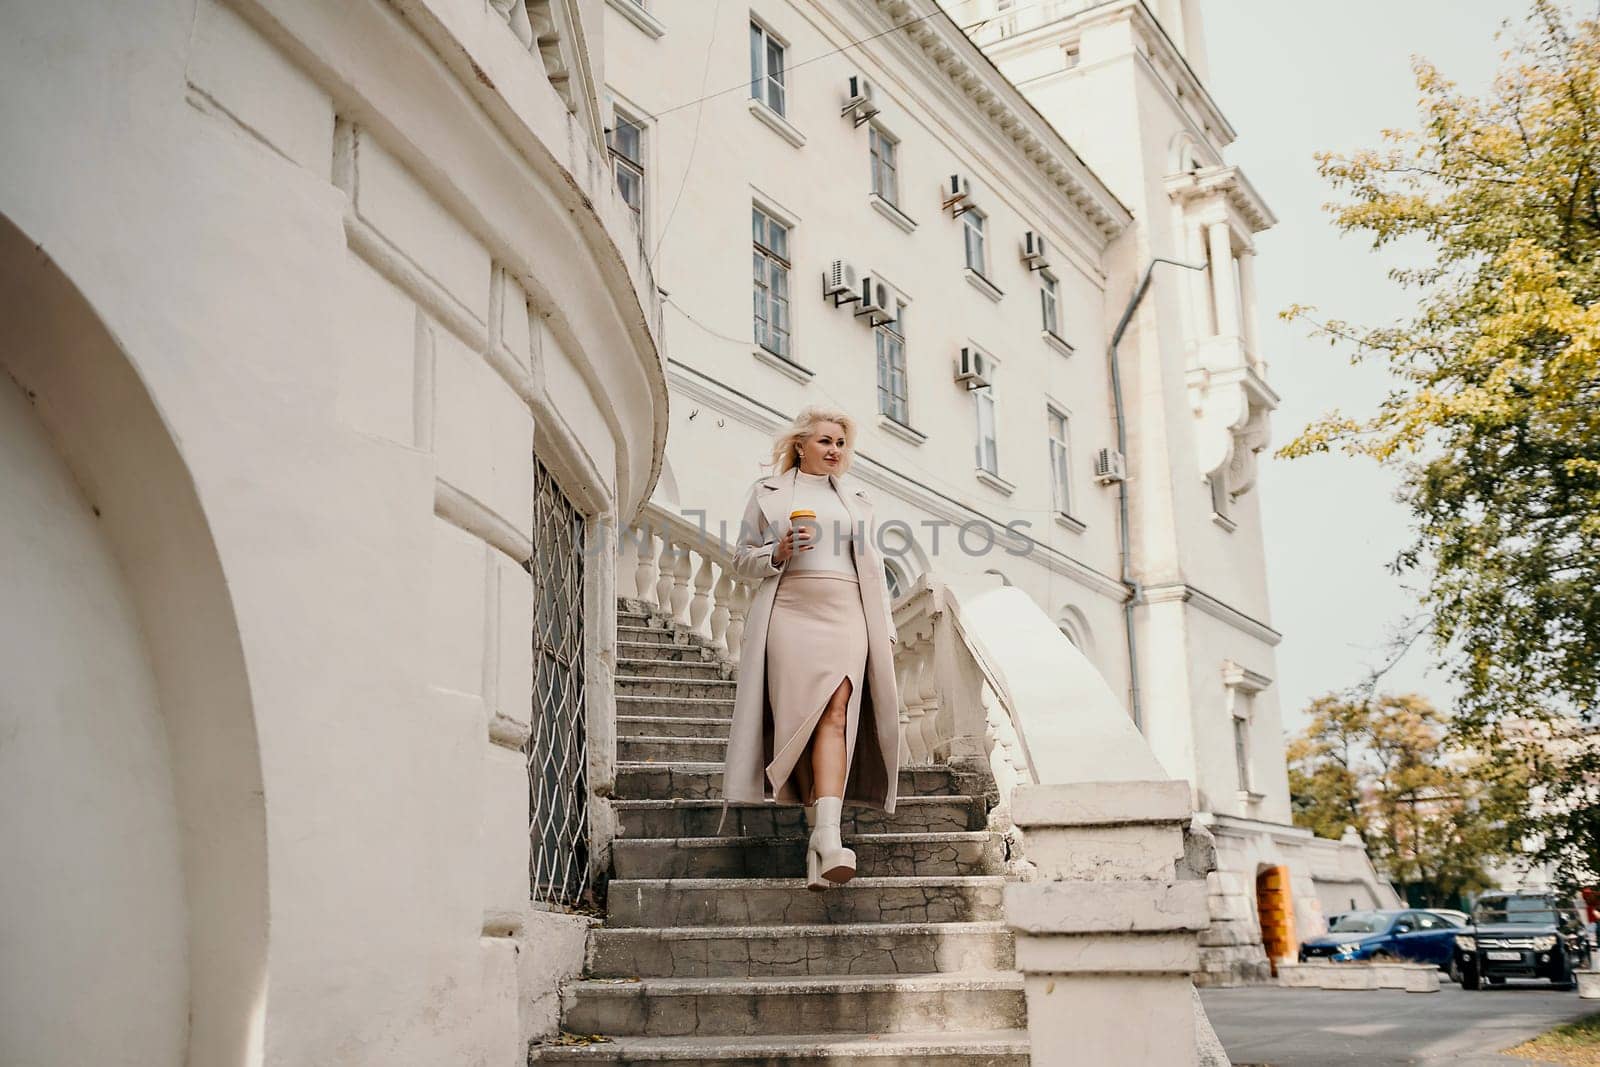 A woman in a white dress is walking up a set of stairs. She is holding a cup in her hand. The scene is set in front of a large white building with a balcony